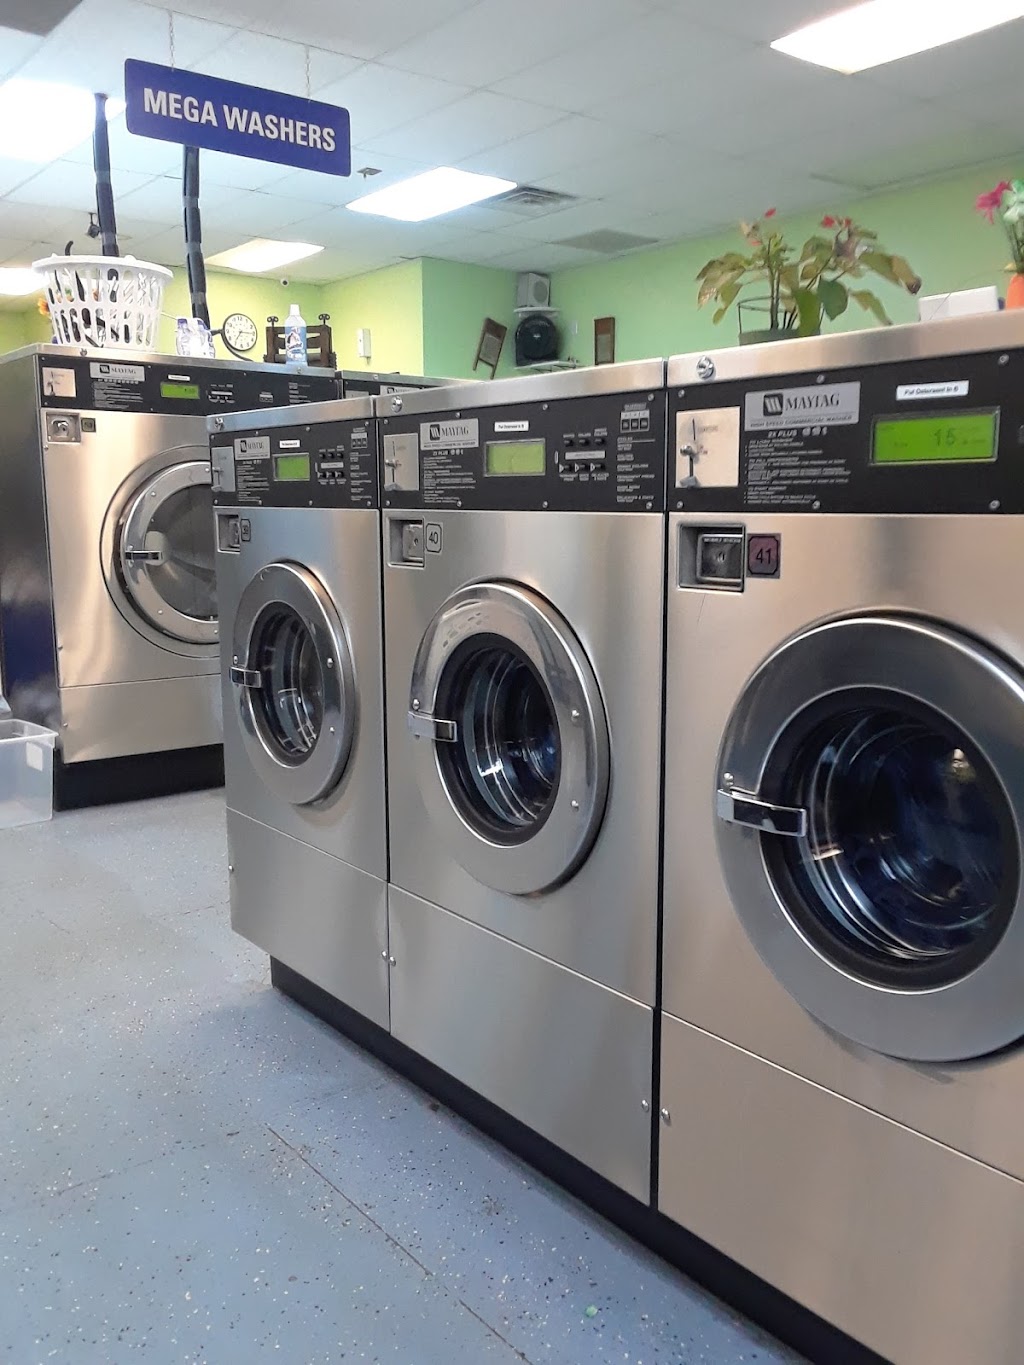 Maggies Coin Laundry, Inc | 7520 S Tryon St, Charlotte, NC 28217 | Phone: (704) 965-2319